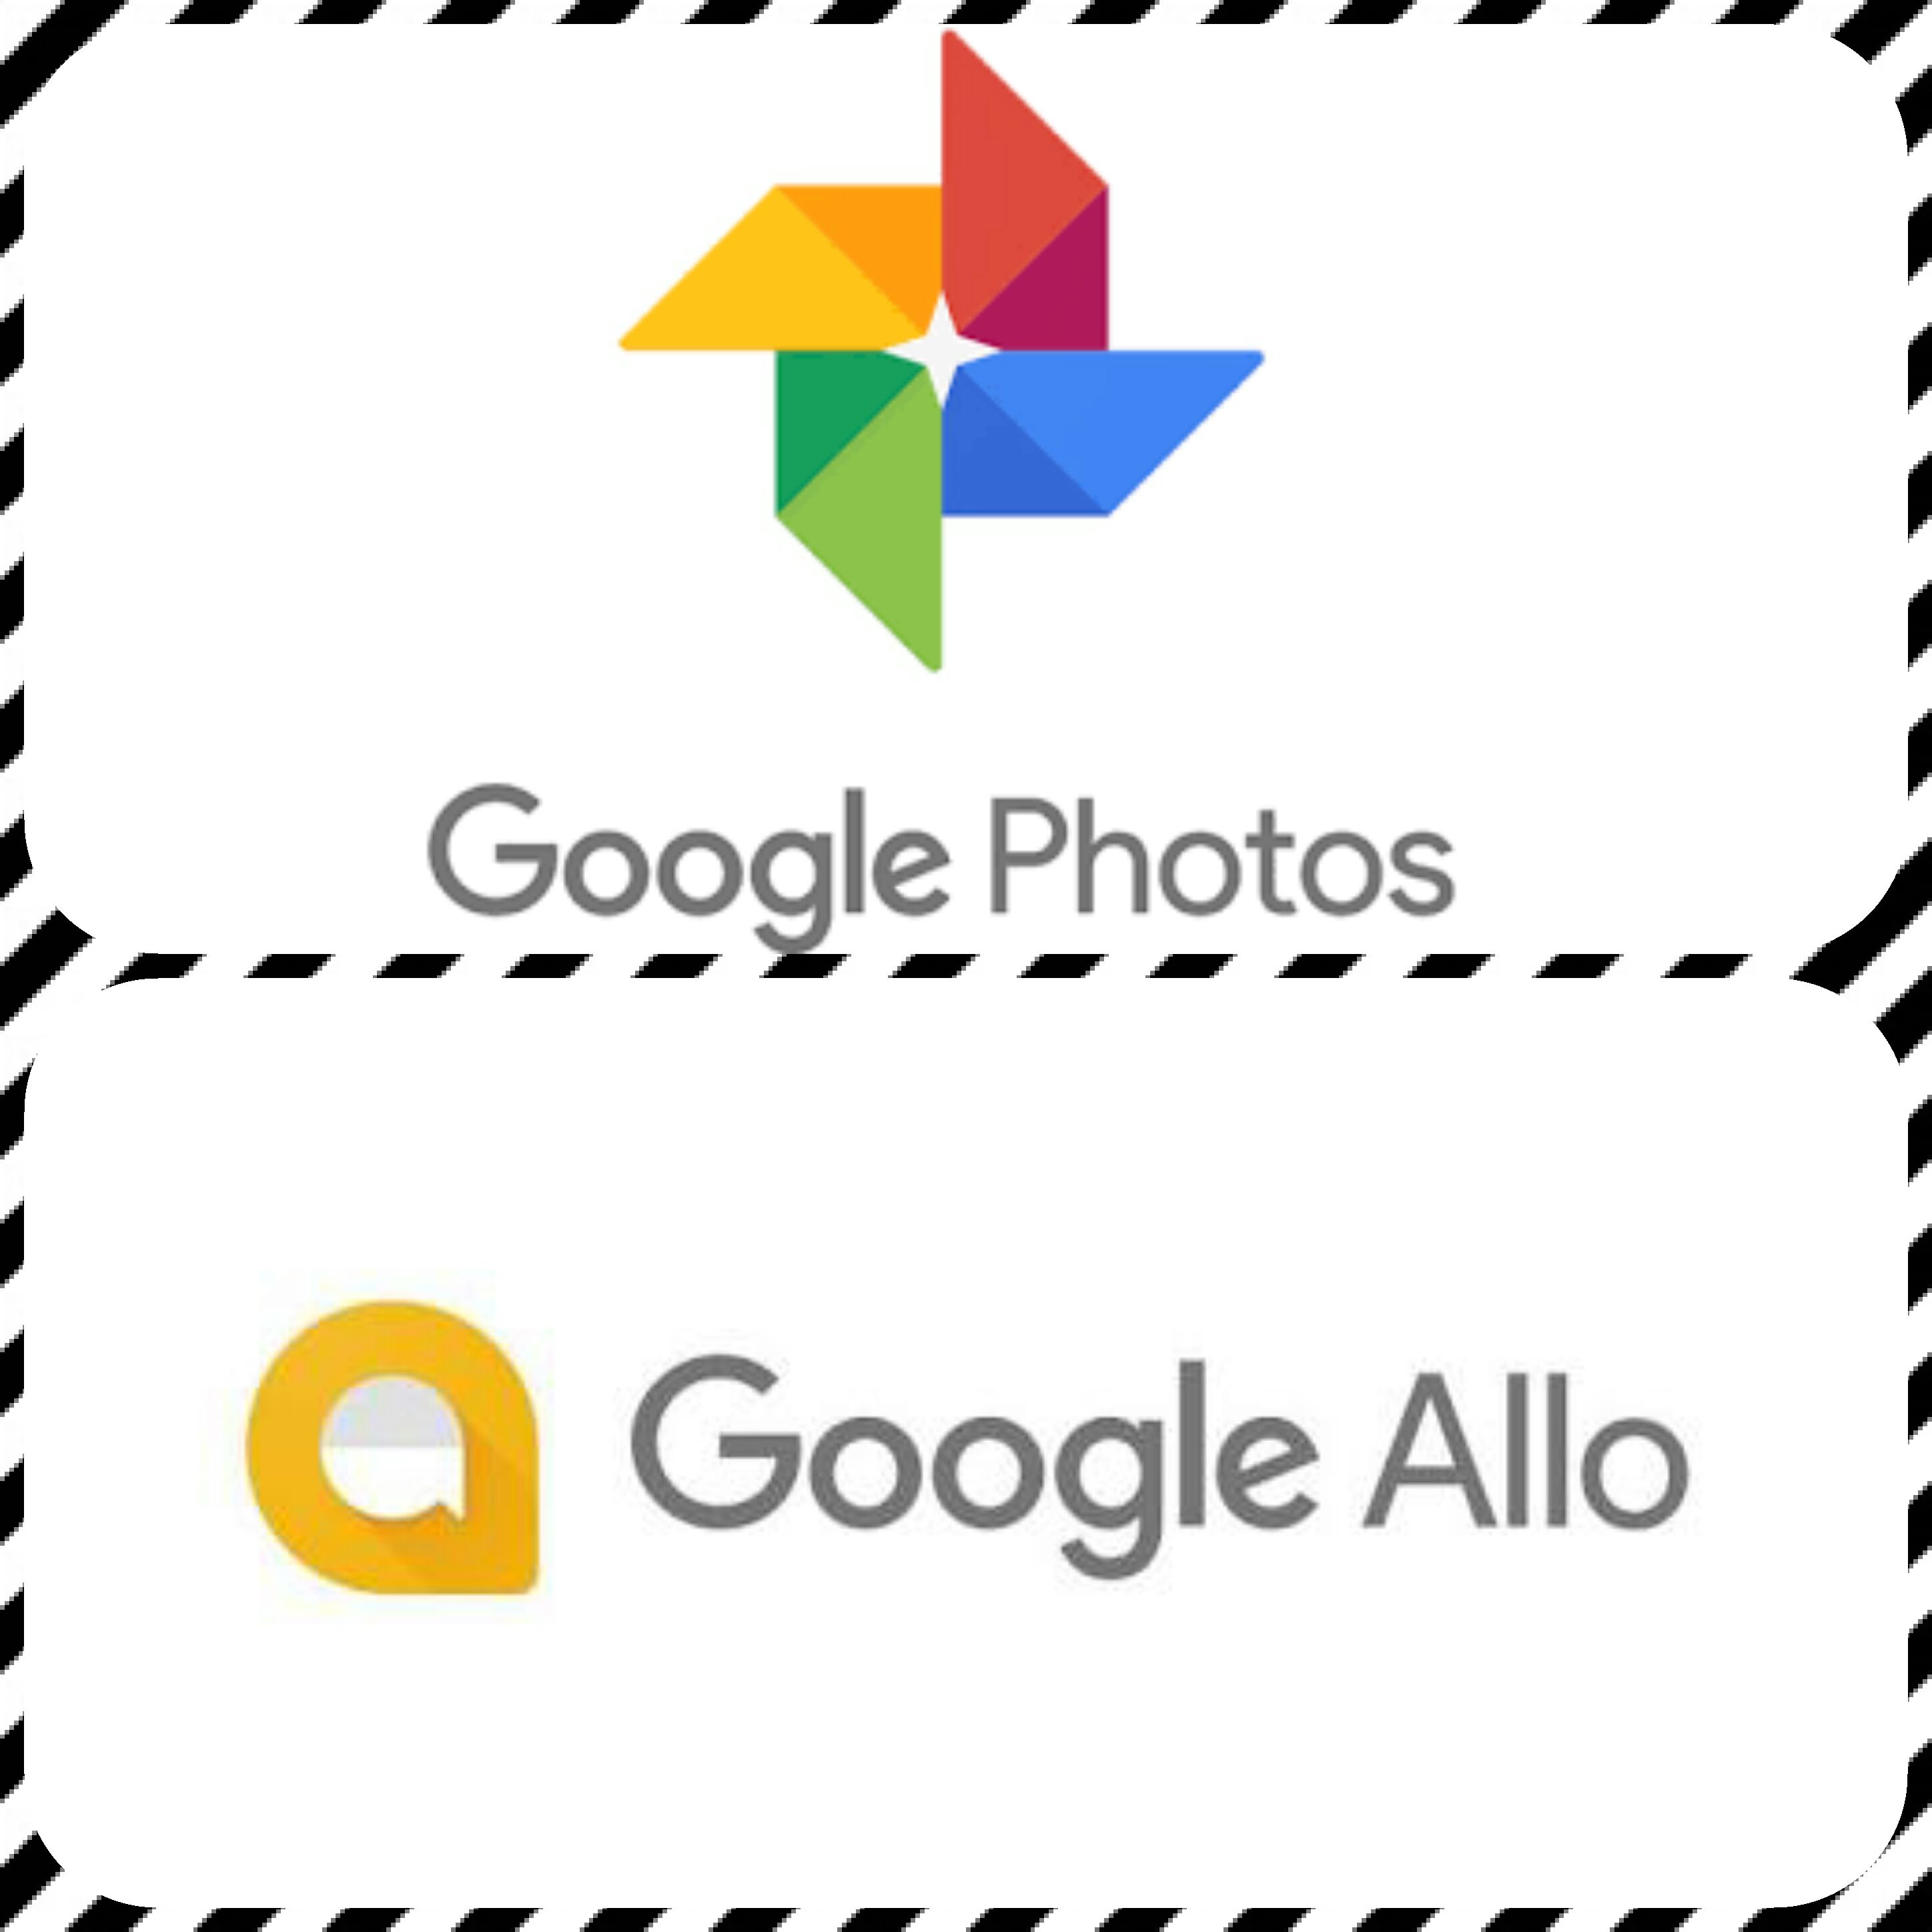 download: google allo and google photos receives update via google play store